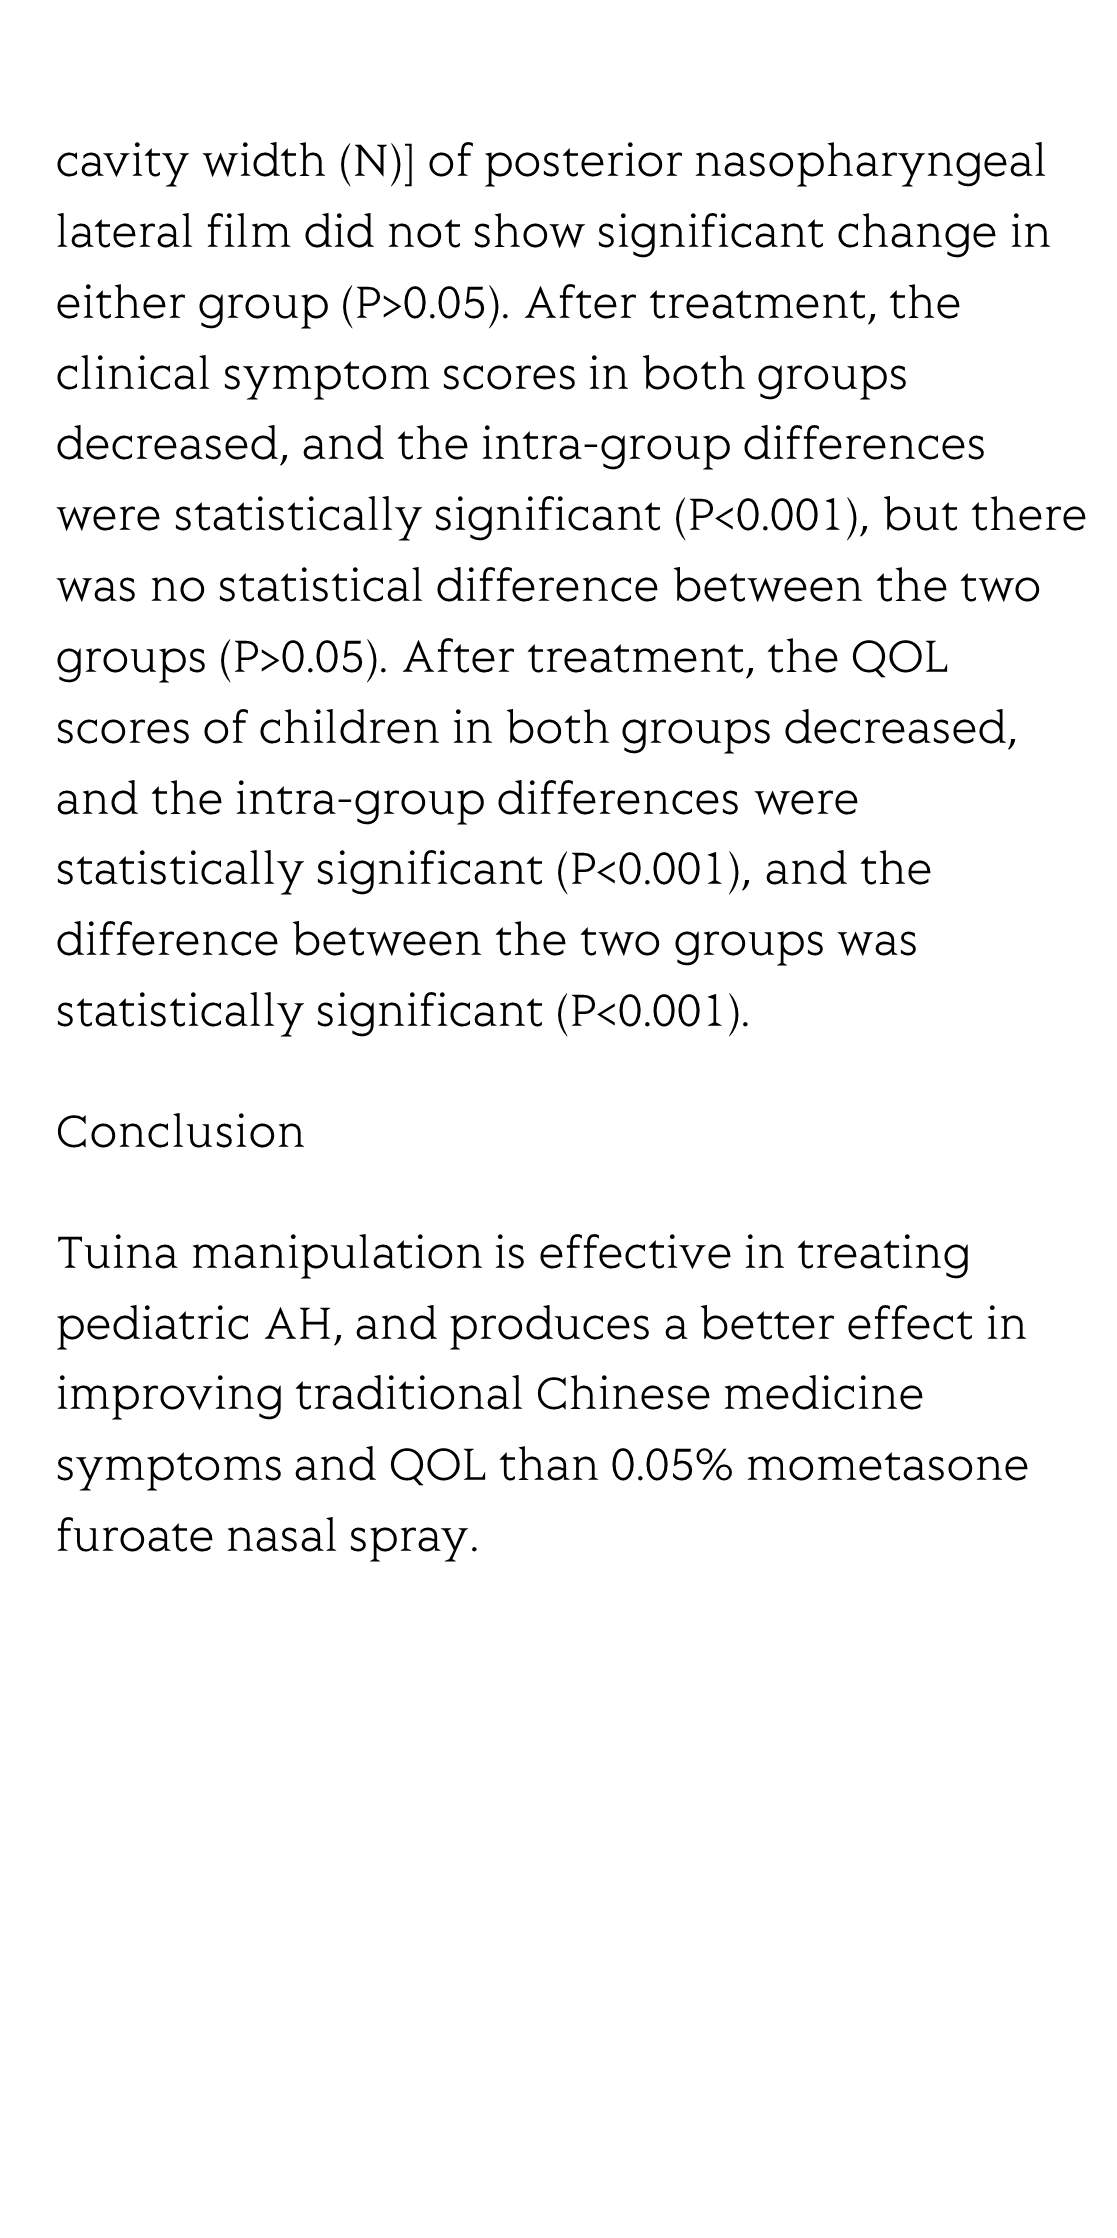 Journal of Acupuncture and Tuina Science_3